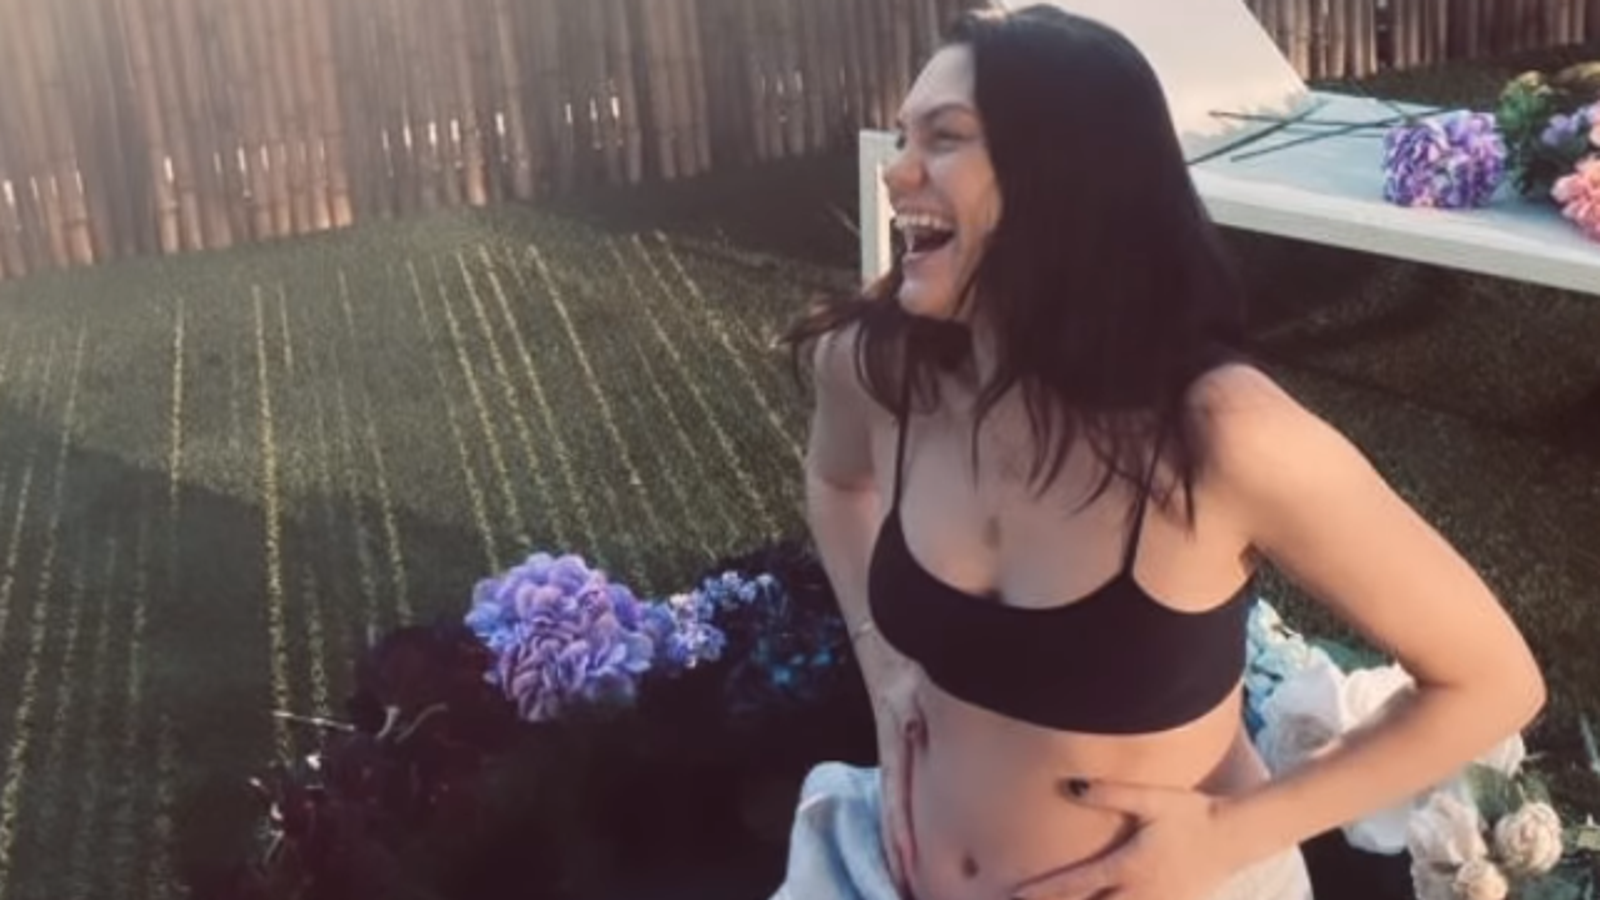 Jessie J announces she is pregnant after suffering miscarriage just over a year ago | Ents & Arts News